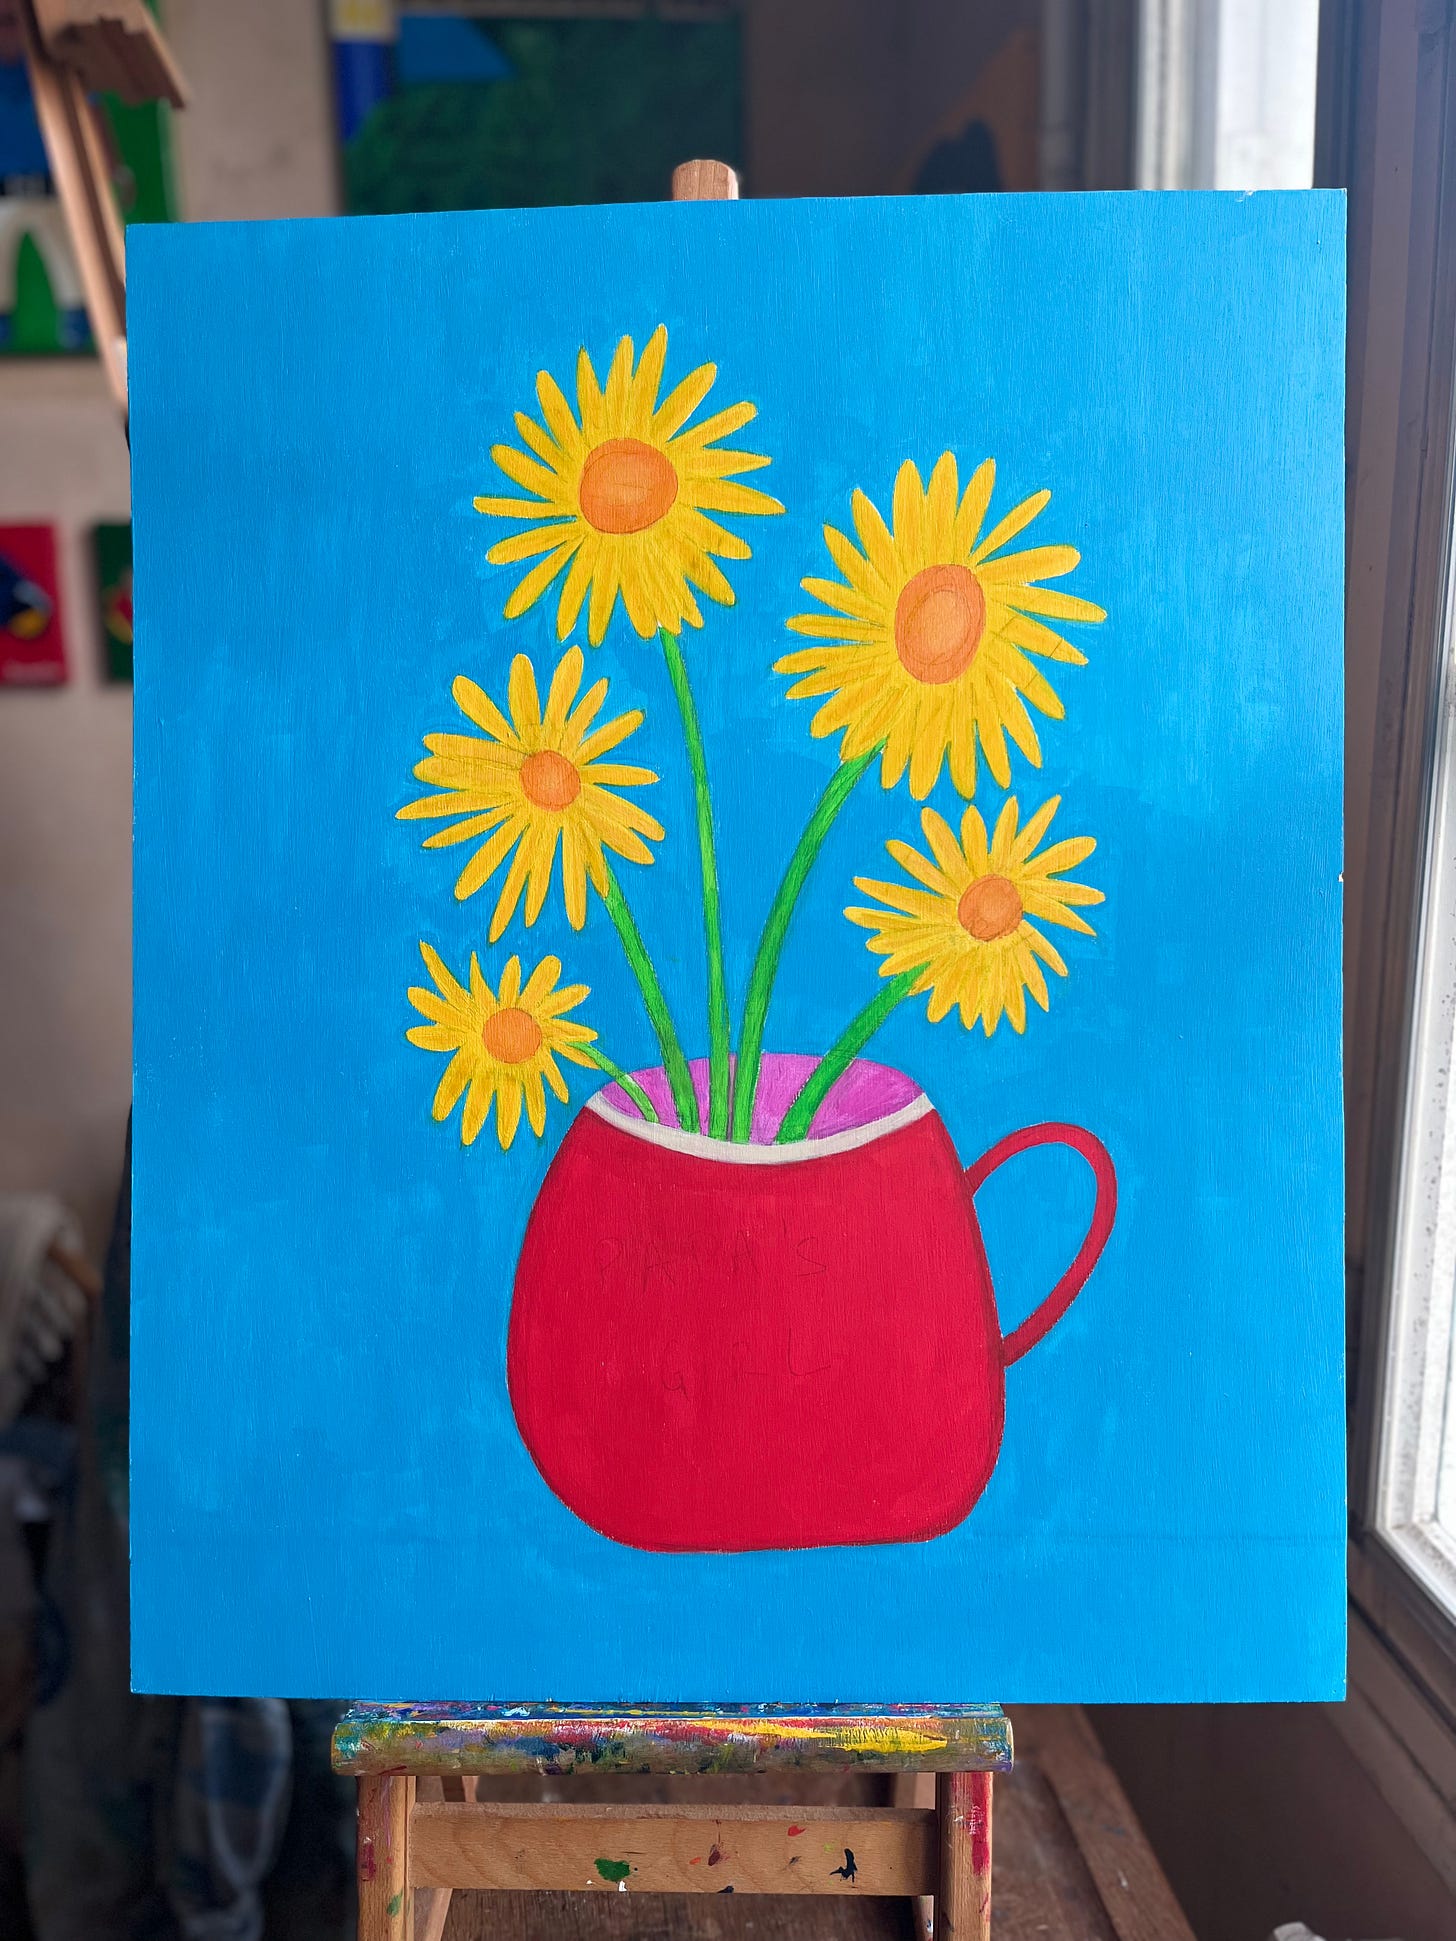 A painting of five yellow flowers in a red pot on a blue background